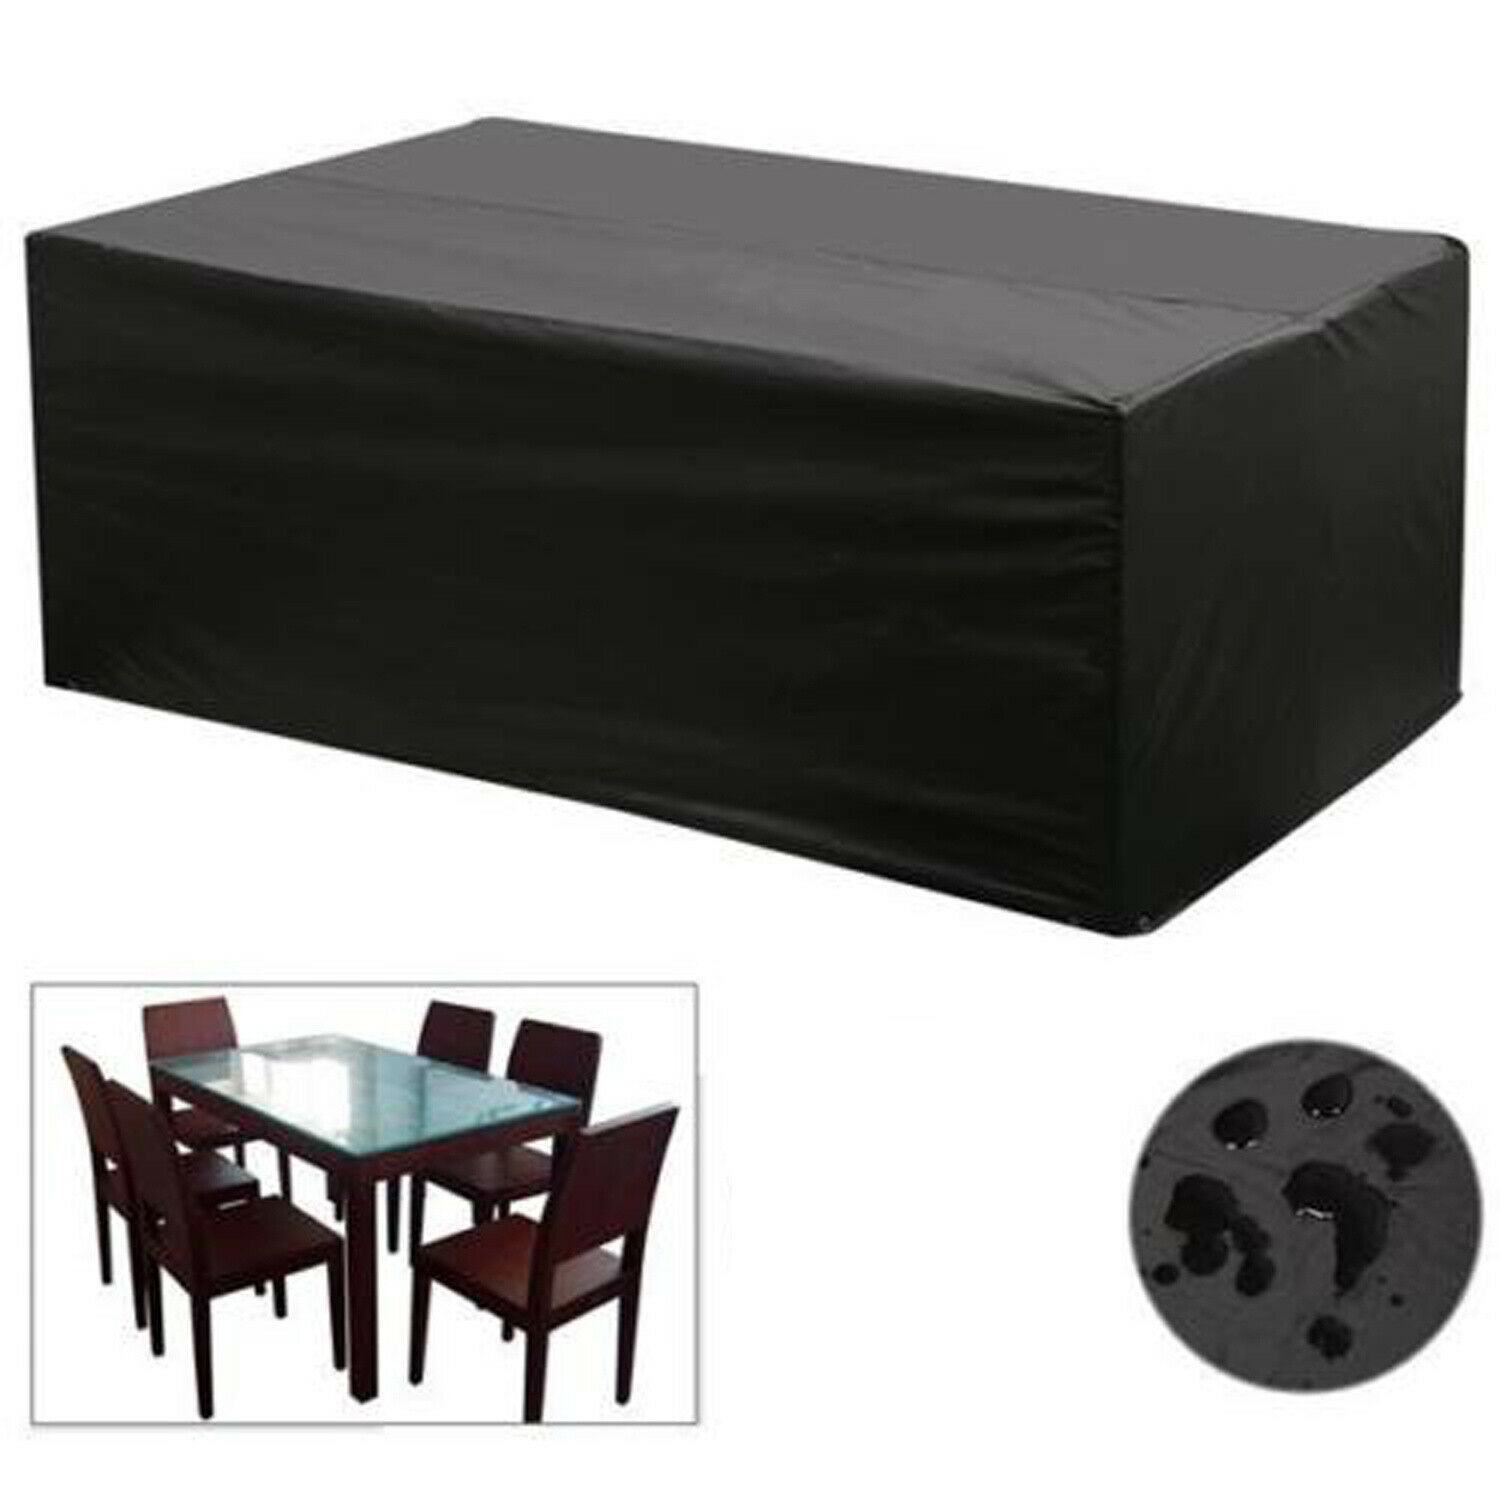 6 8 Seater Large Rectangular Patio Set Cover Outdoor Garden Table Chair Bed Cube within size 1500 X 1500